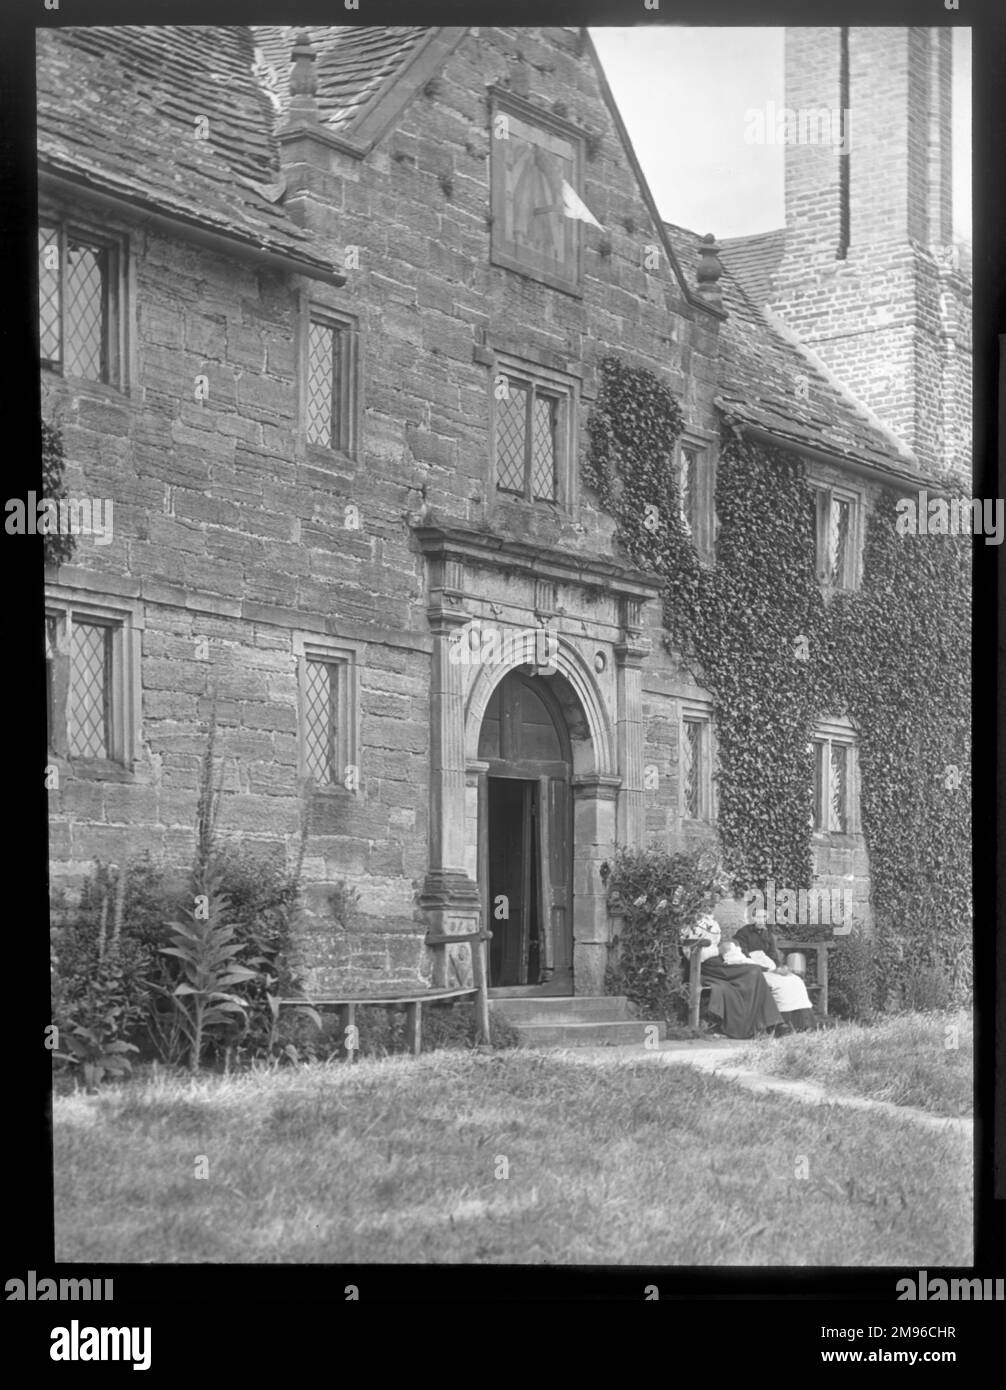 Exterior view of Sackville College, East Grinstead, West Sussex, a Jacobean almshouse founded in 1609 to provide sheltered accommodation for the elderly.  Two elderly women can be seen sitting on a bench to the right of the doorway. Stock Photo